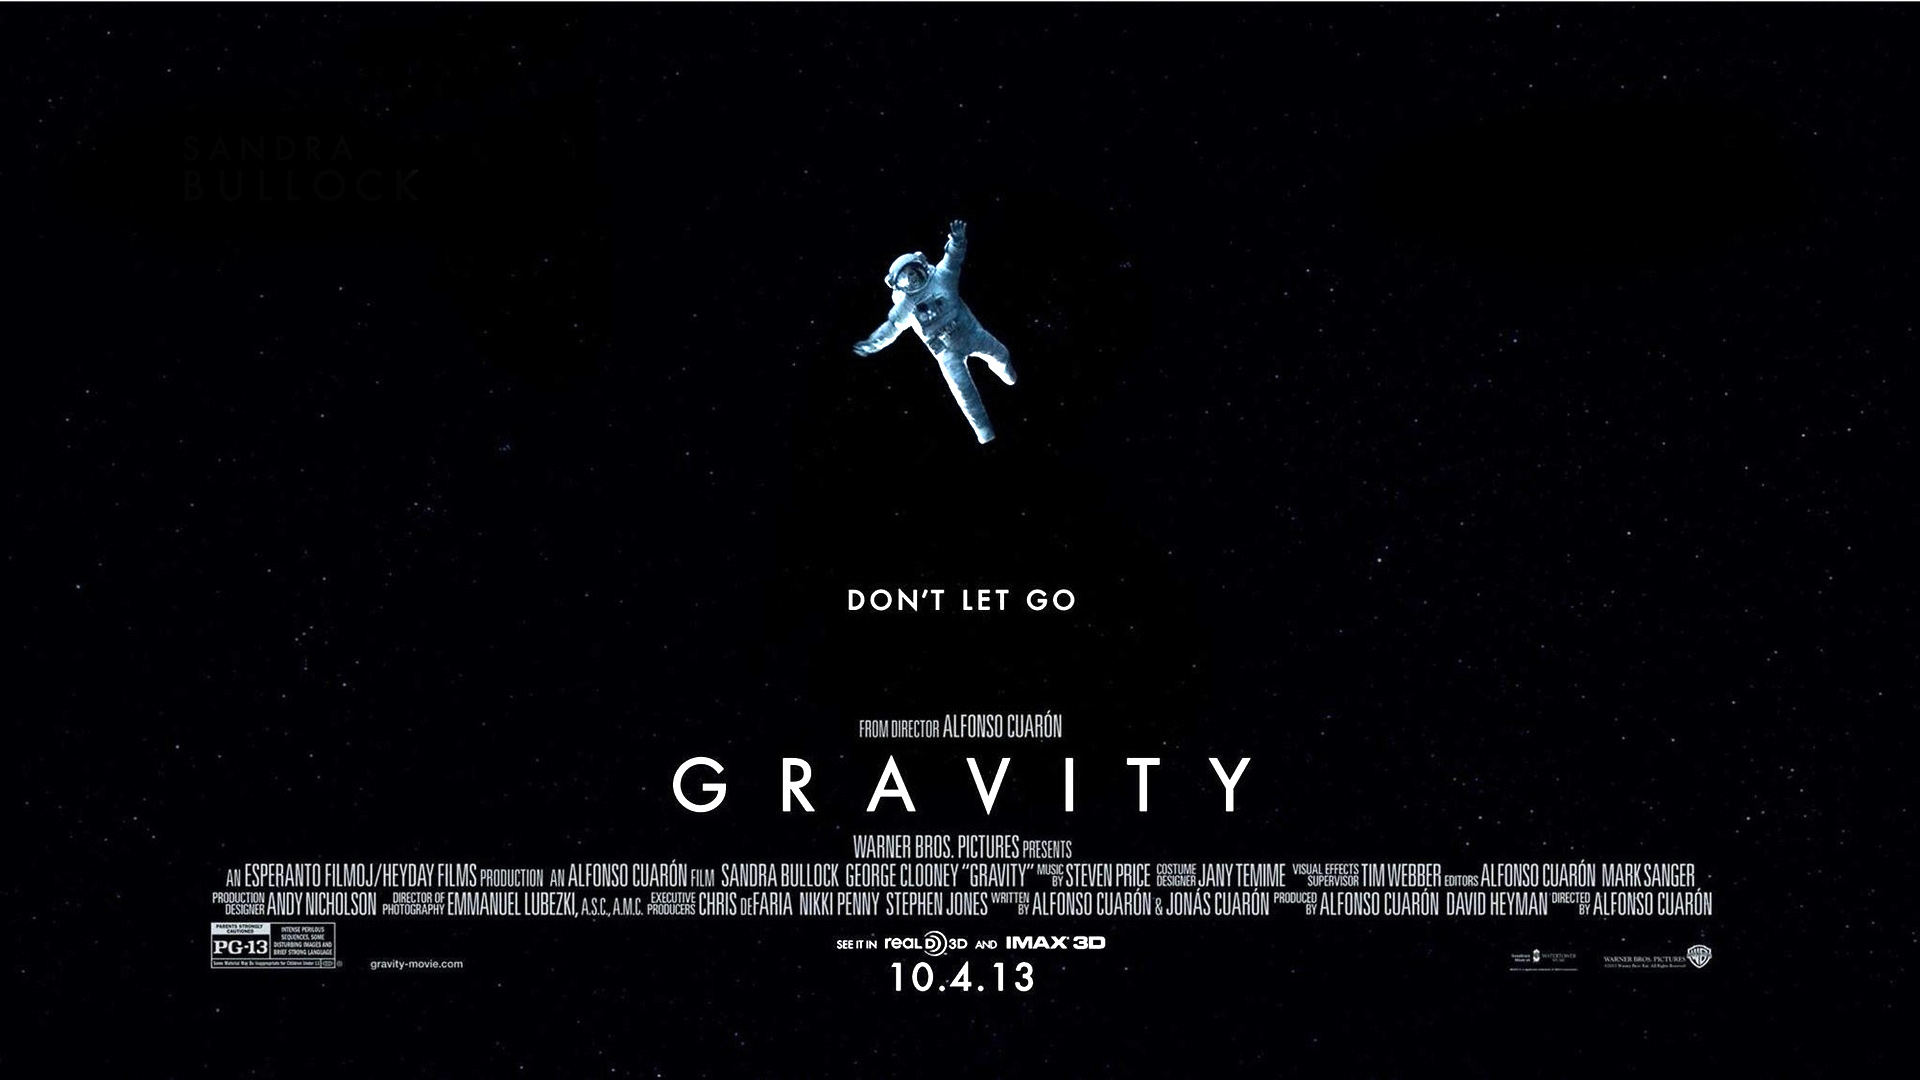 Gravity Movie | Gravity Movie Wallpapers | Gravity Movie images | Wallpaper 4of 4